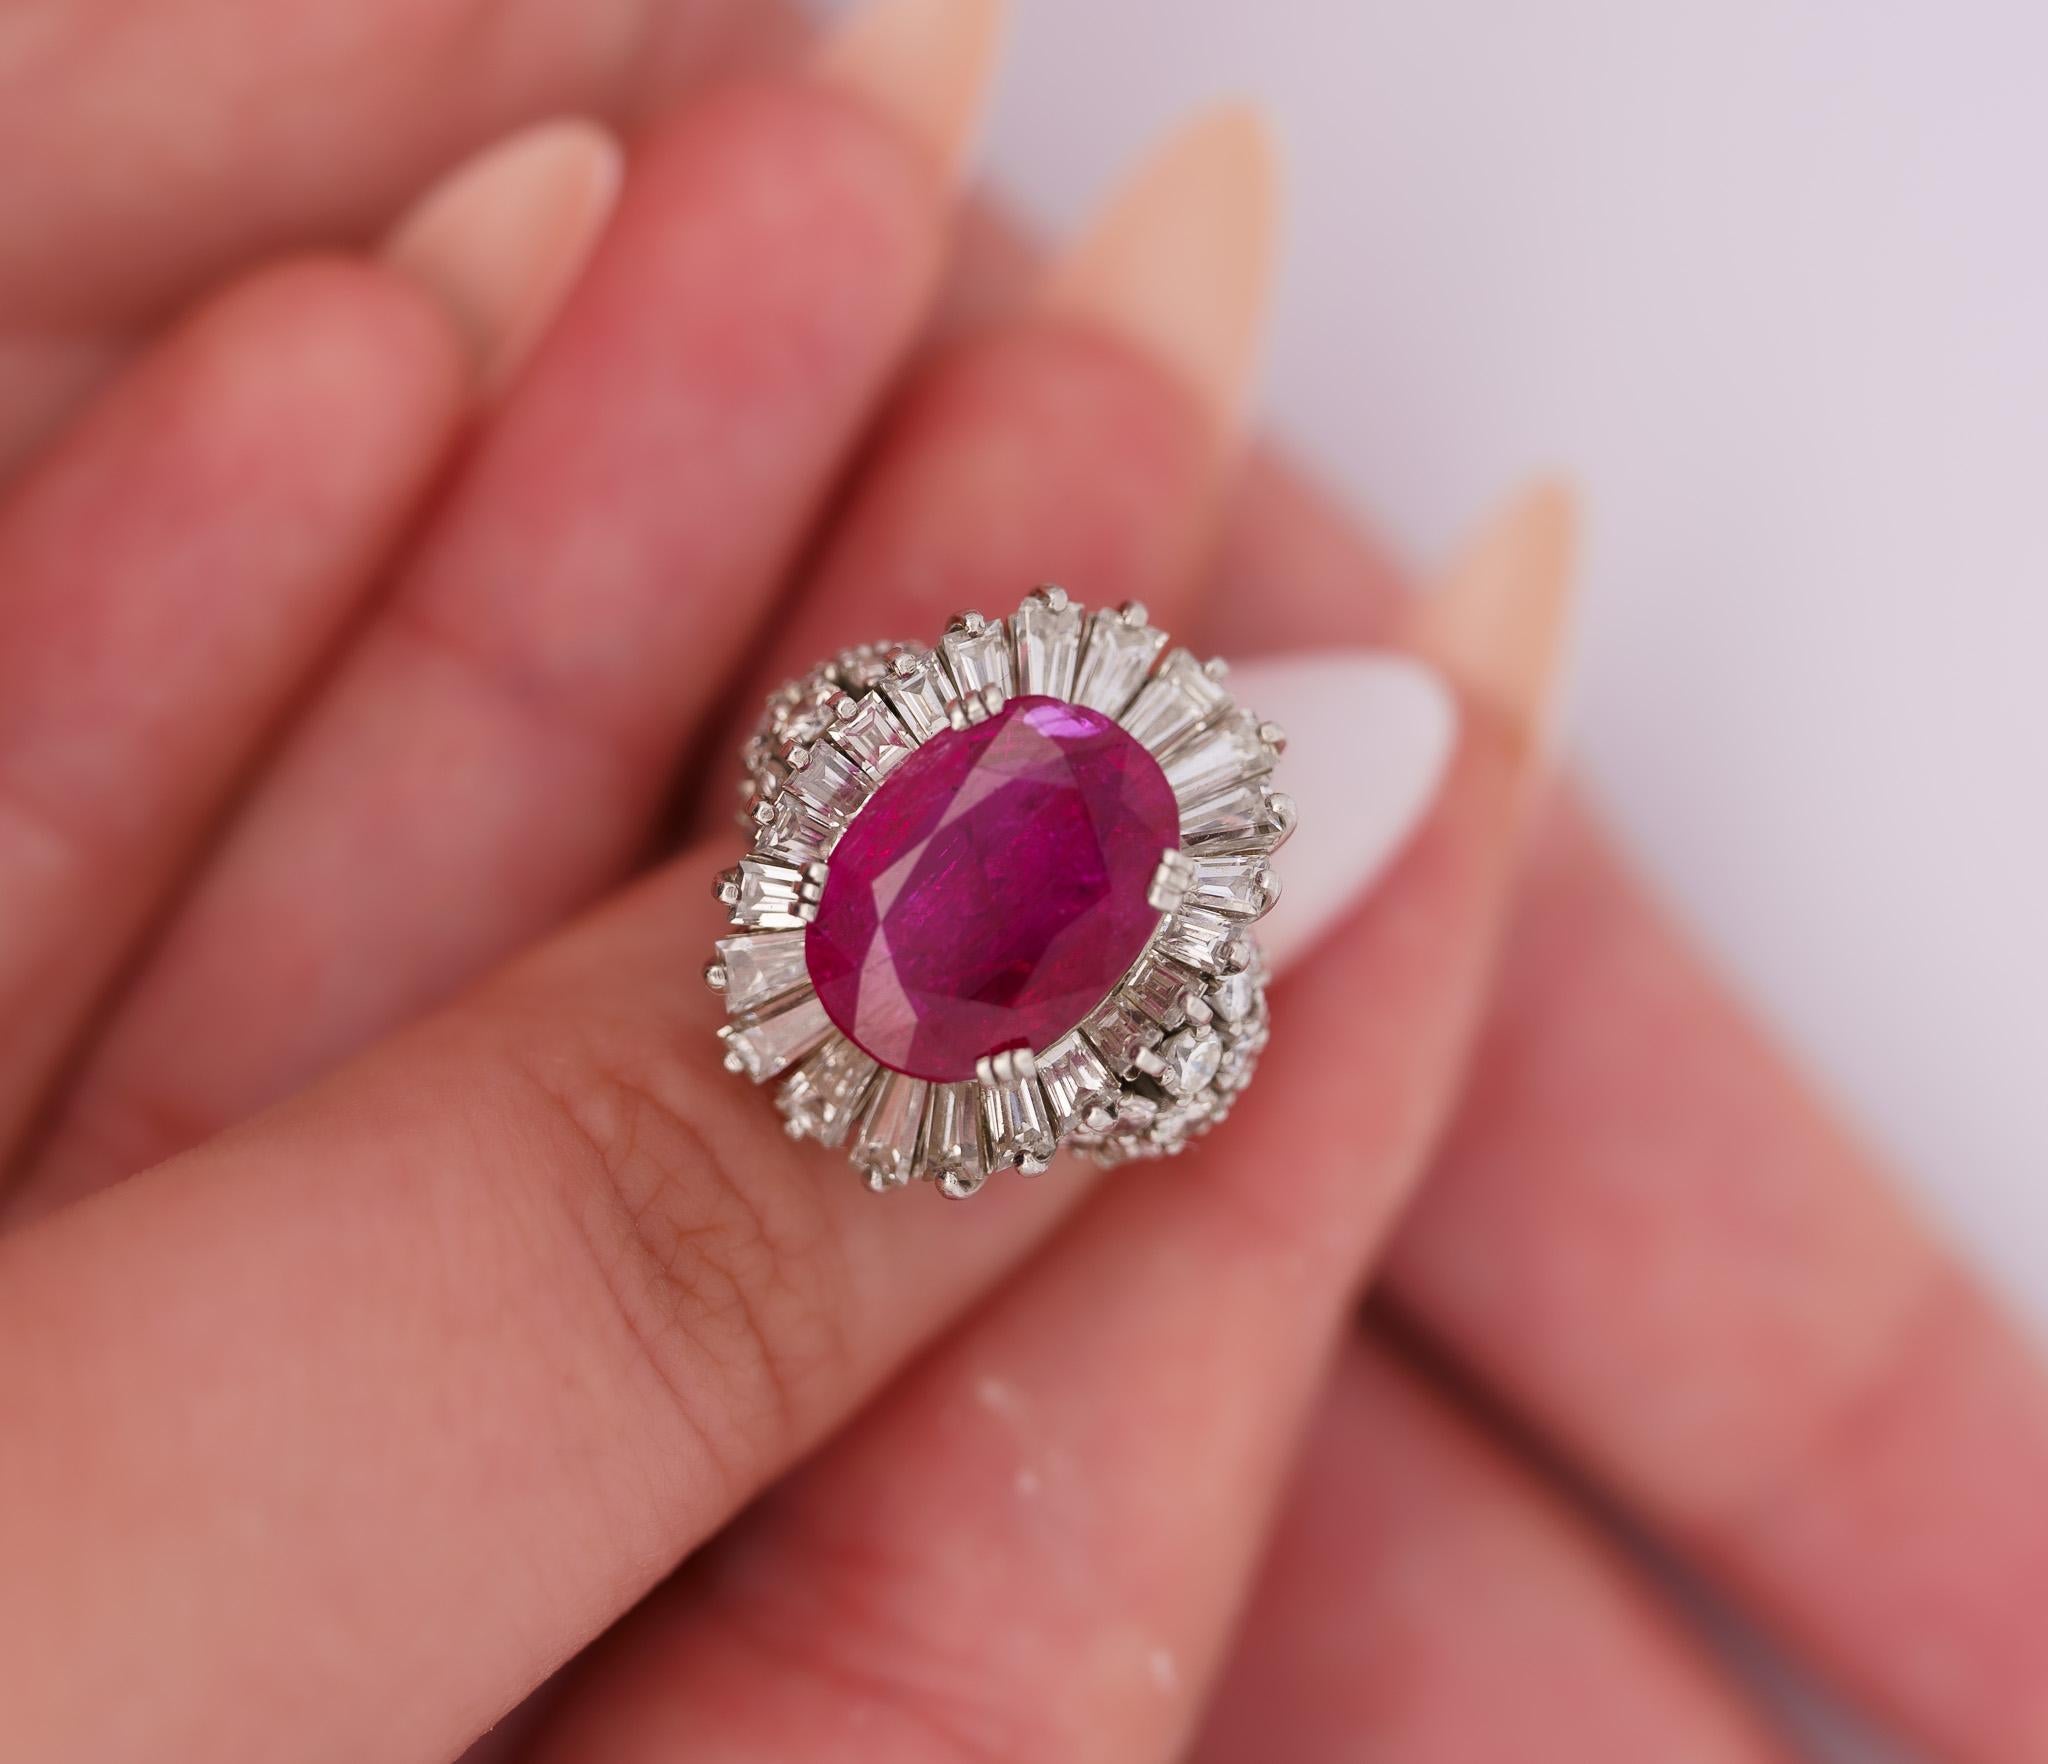 Vintage No Heat Burma Ruby & Diamond Cocktail Ring. 

This vintage ring features a natural, no-heat 6.95-carat oval-cut red ruby center stone with AGL certification. The ruby is paired with diamond side stone detailing of 22 baguette-cut and 20